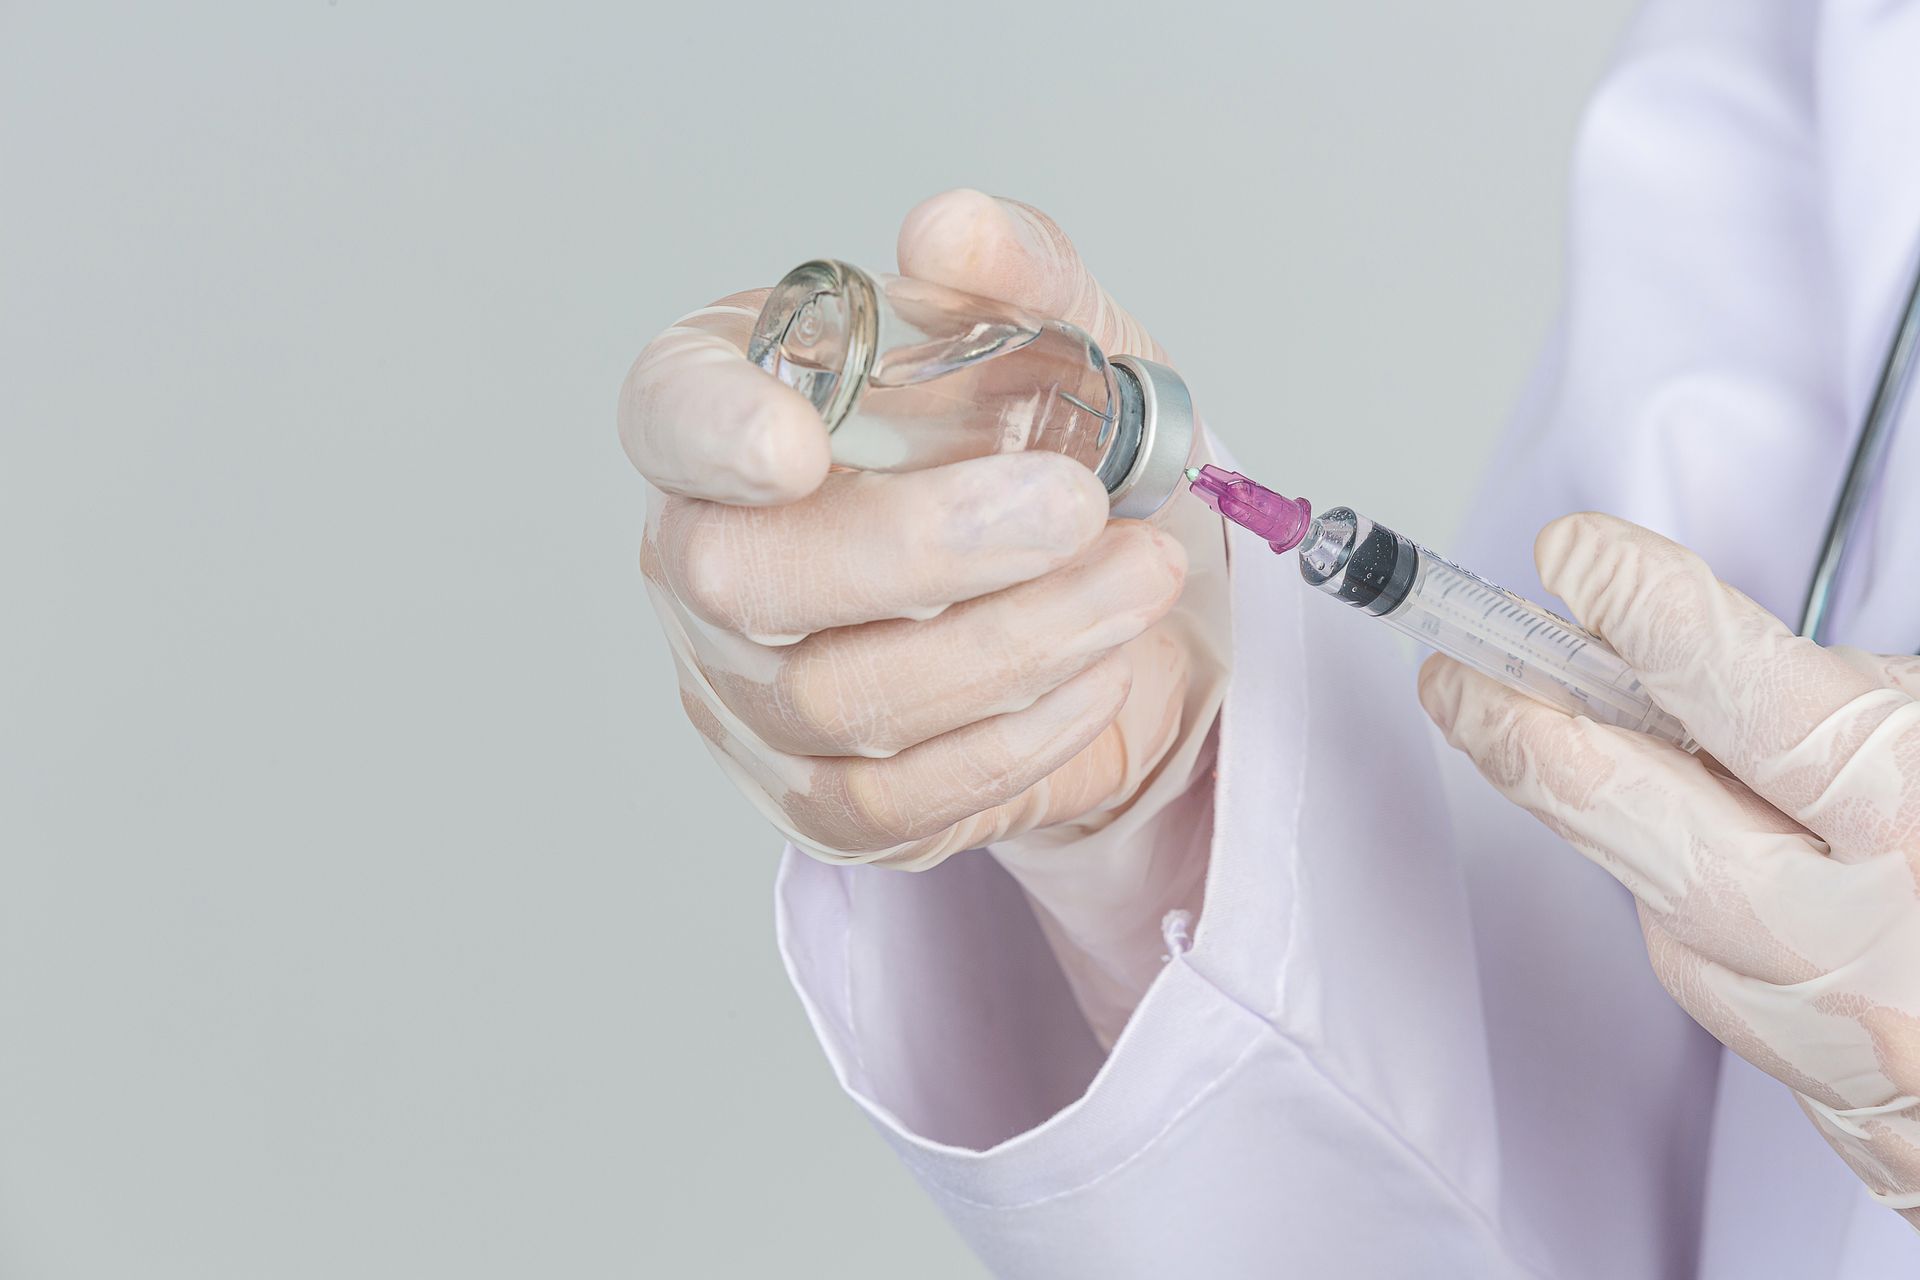 a doctor is holding a syringe and a bottle of liquid